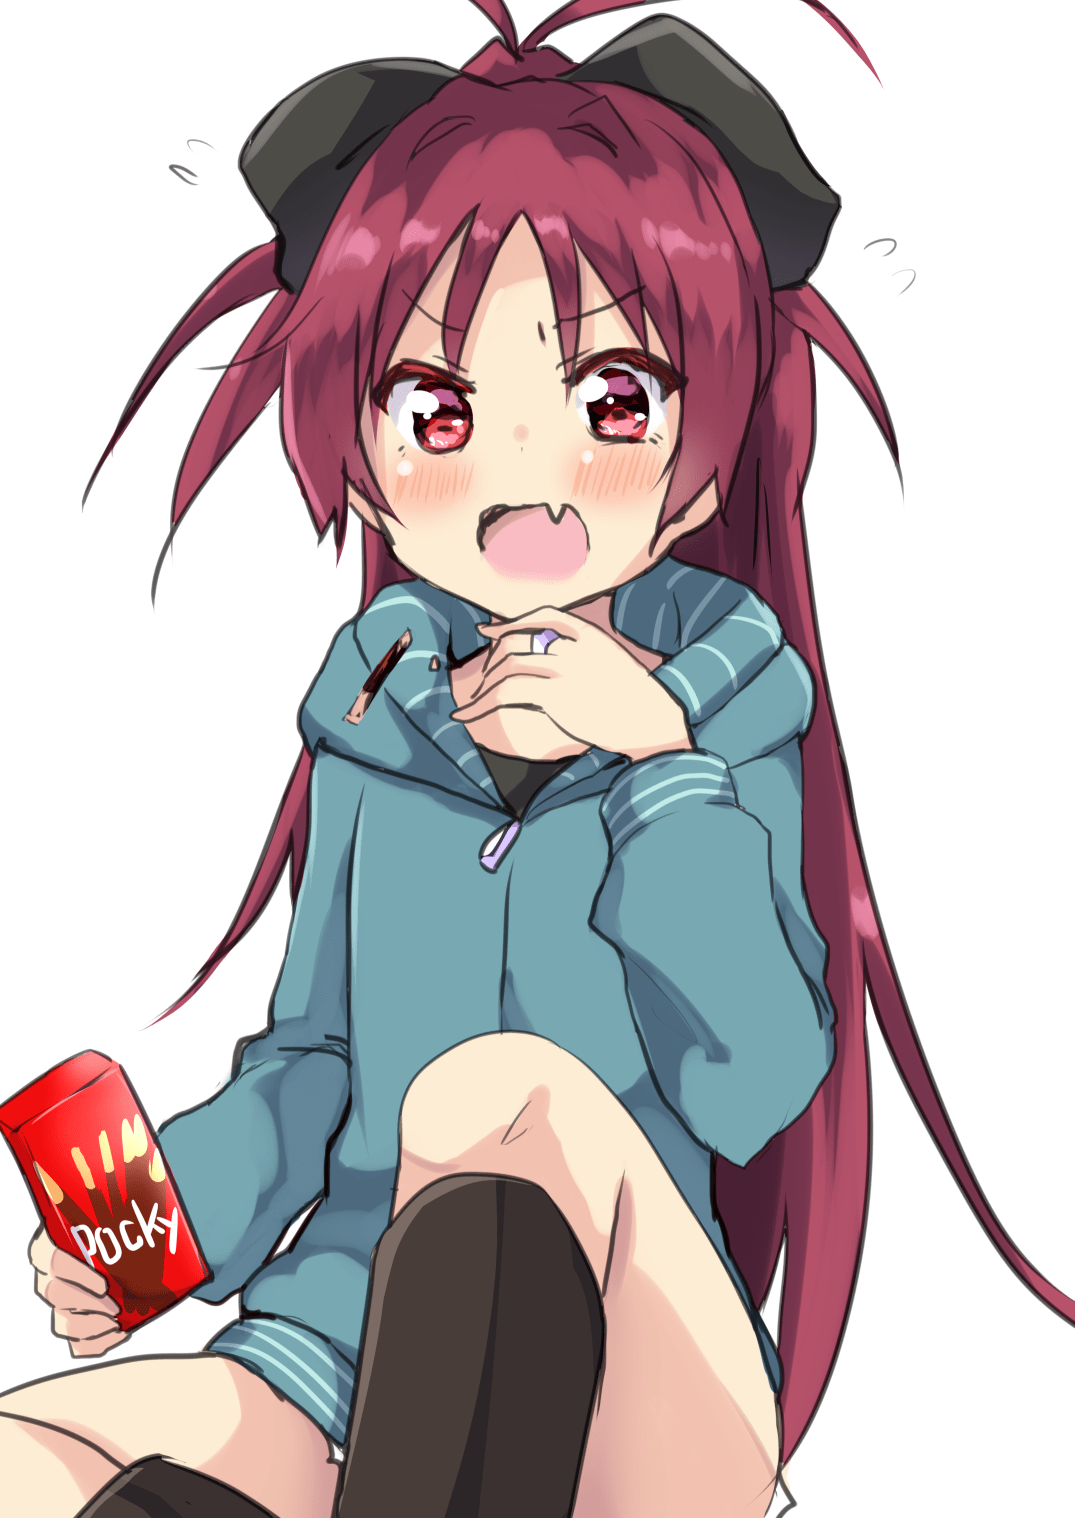 Of course she loves pocky